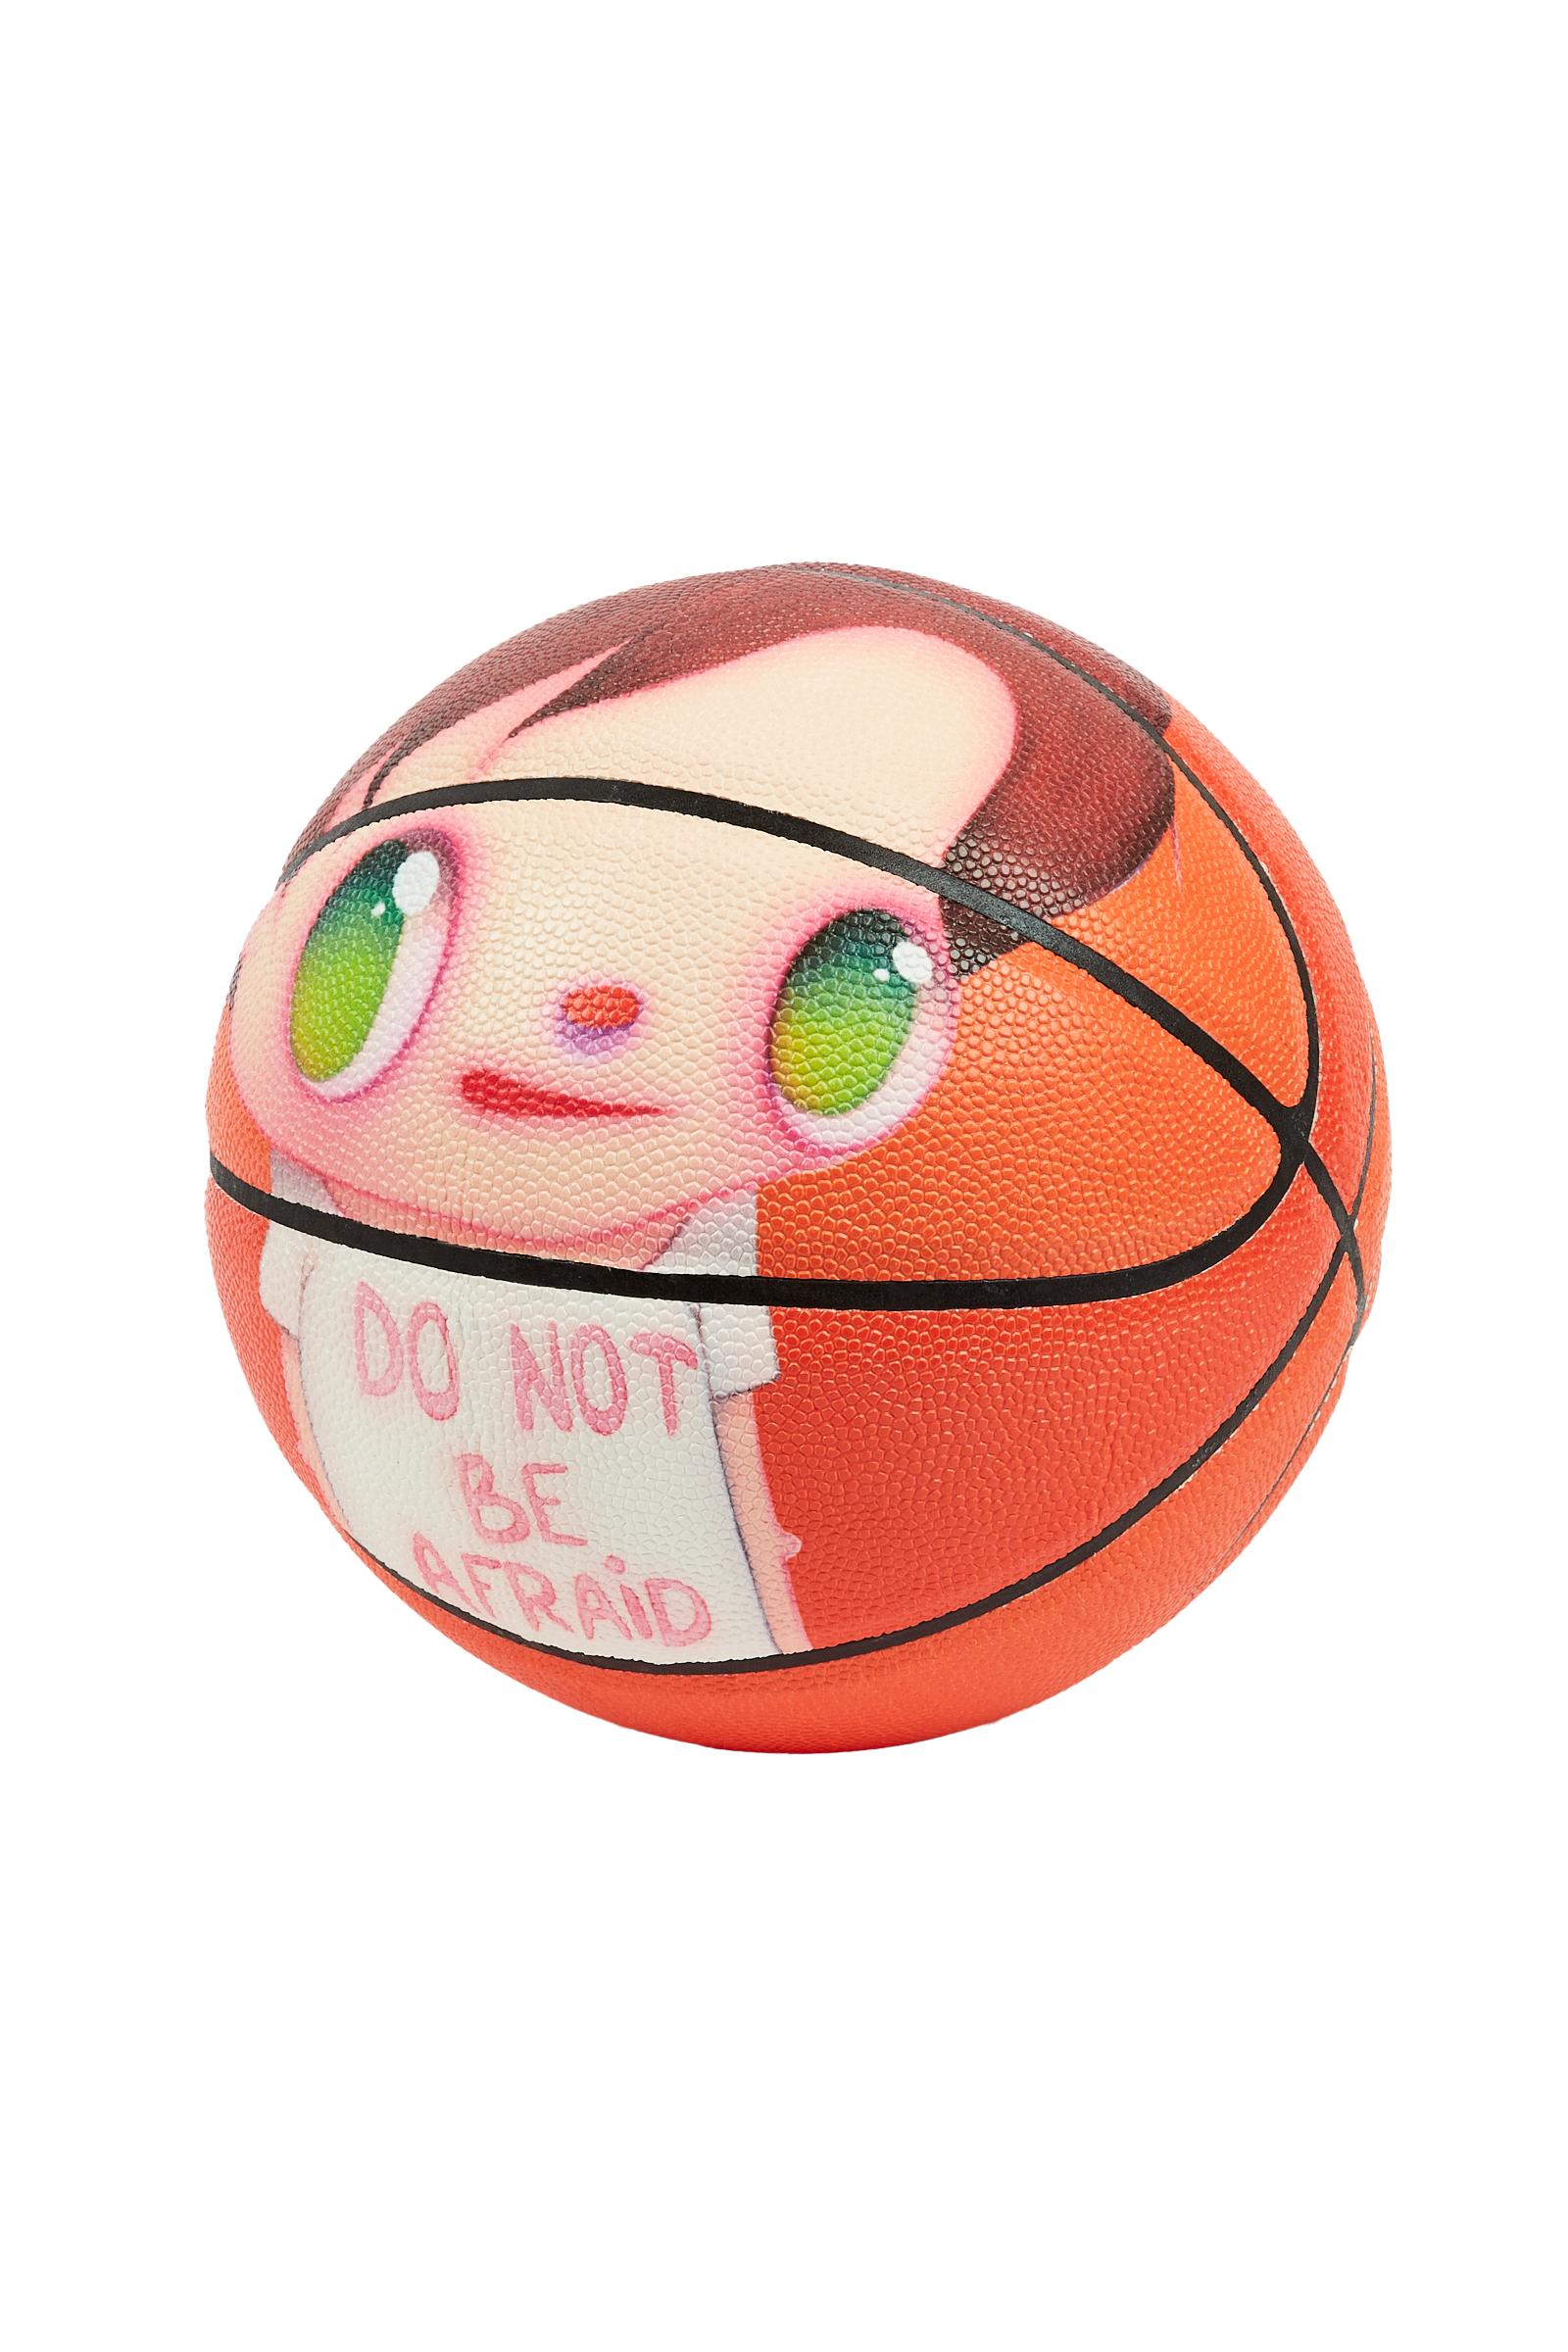 how big is a size 7 basketball in cm